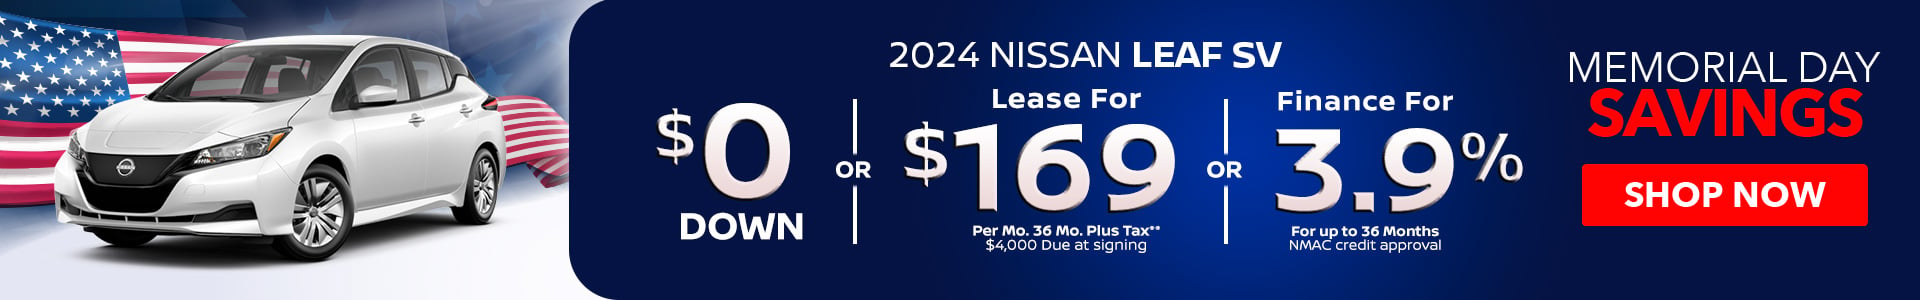 2024 Nissan Leaf - Lease for $169